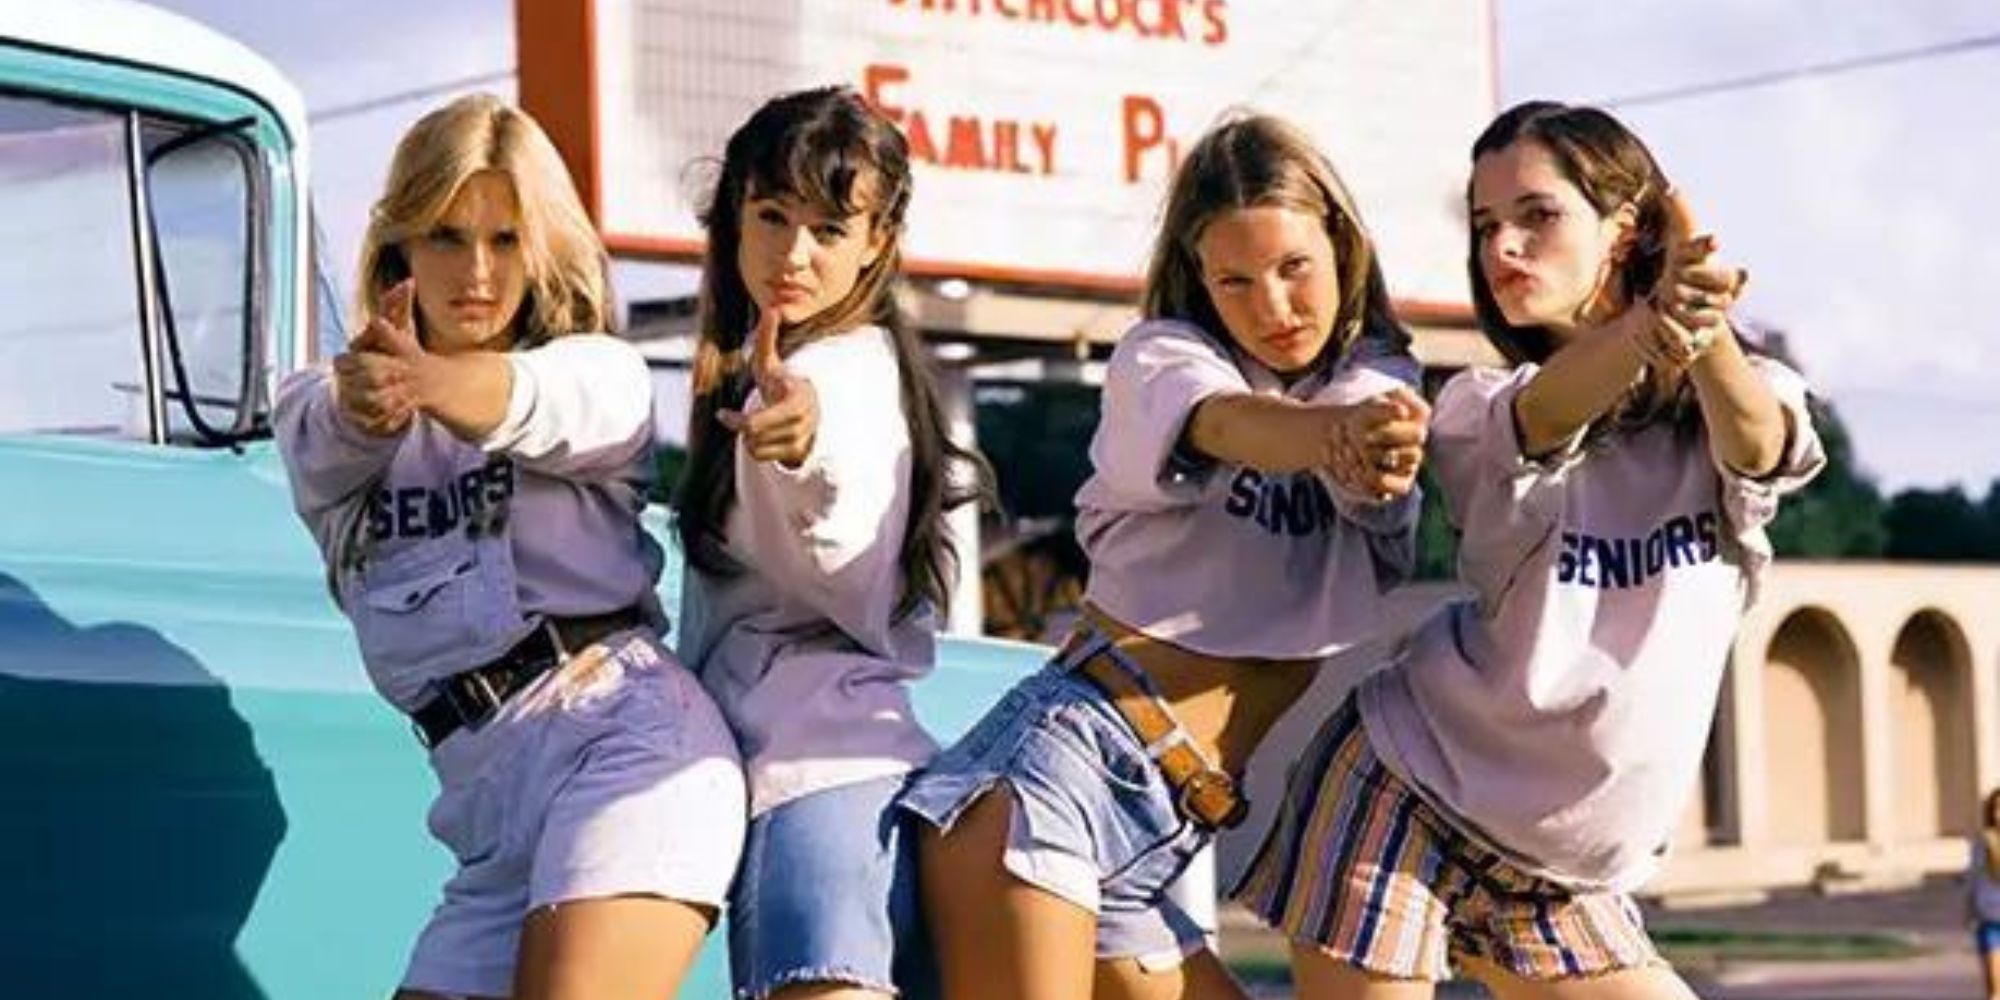 The cheerleaders from Dazed and Confused posing for a picture